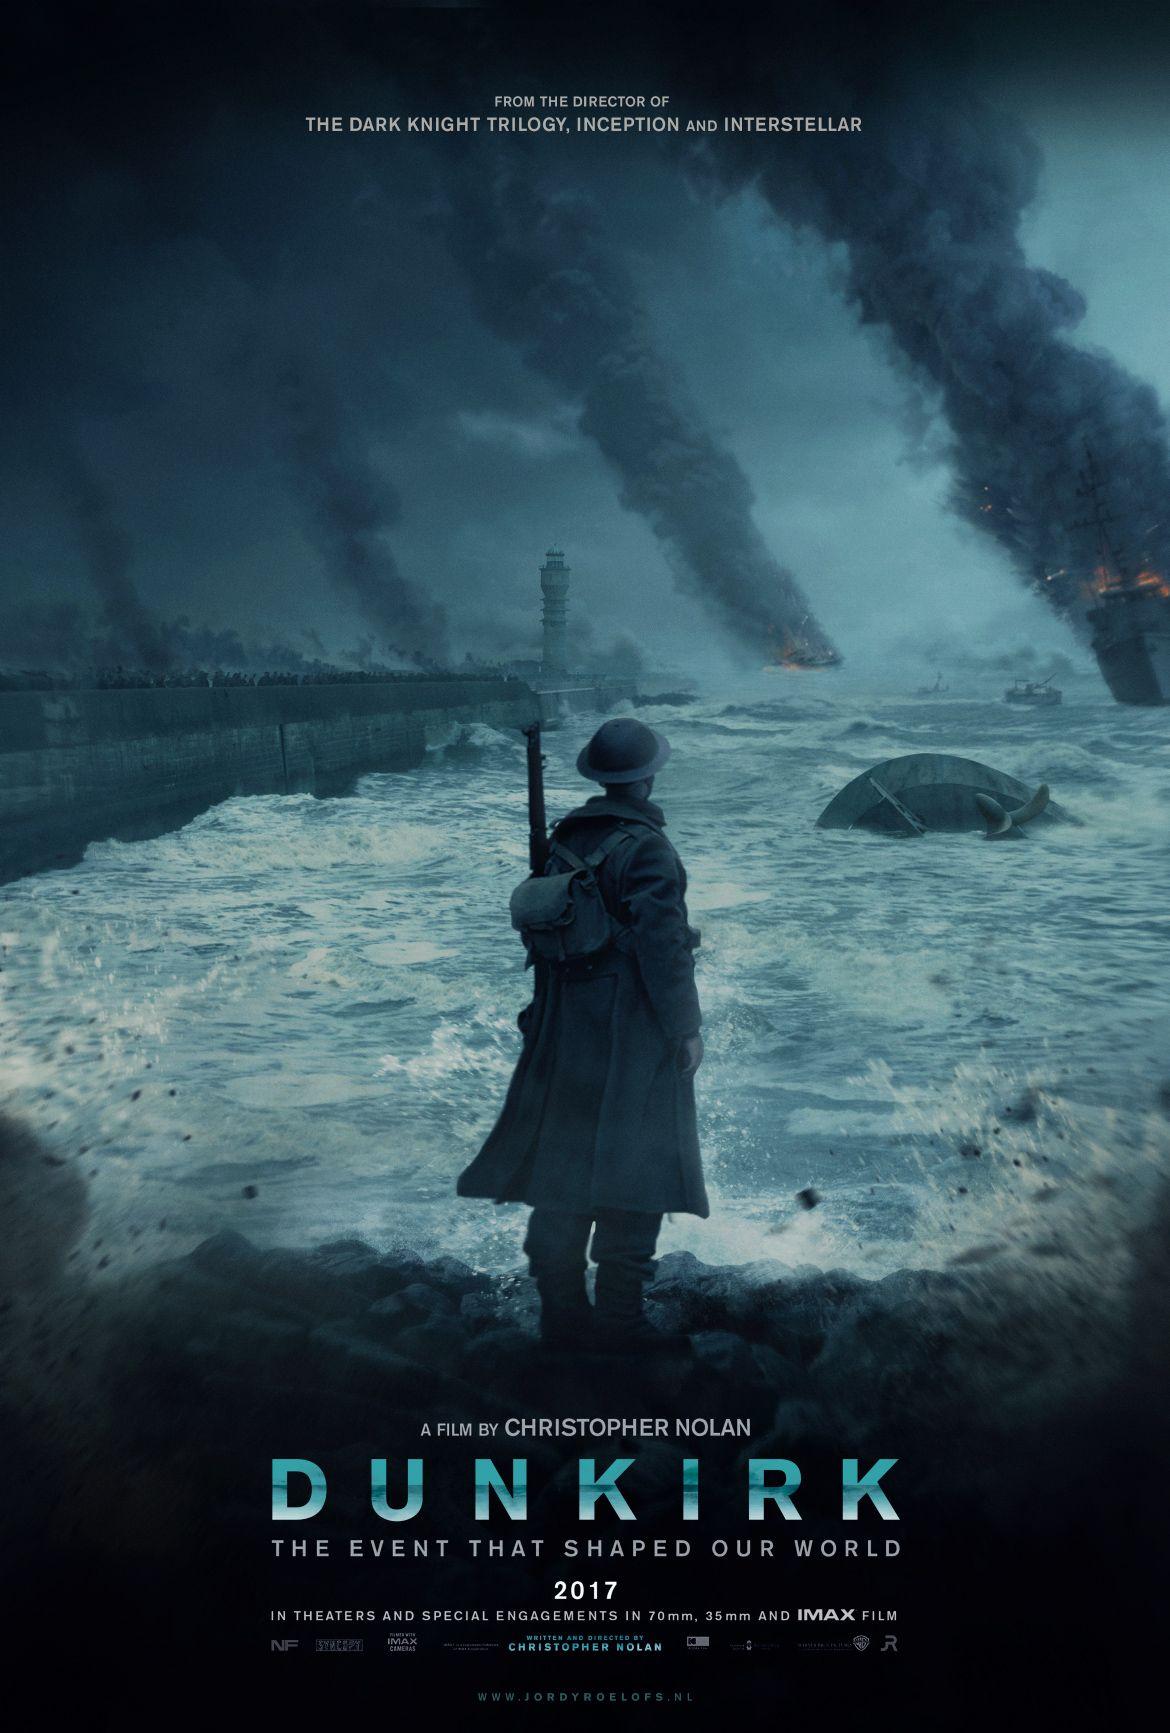 Watch and Download Dunkirk(2017) full movie 1080p. Watch